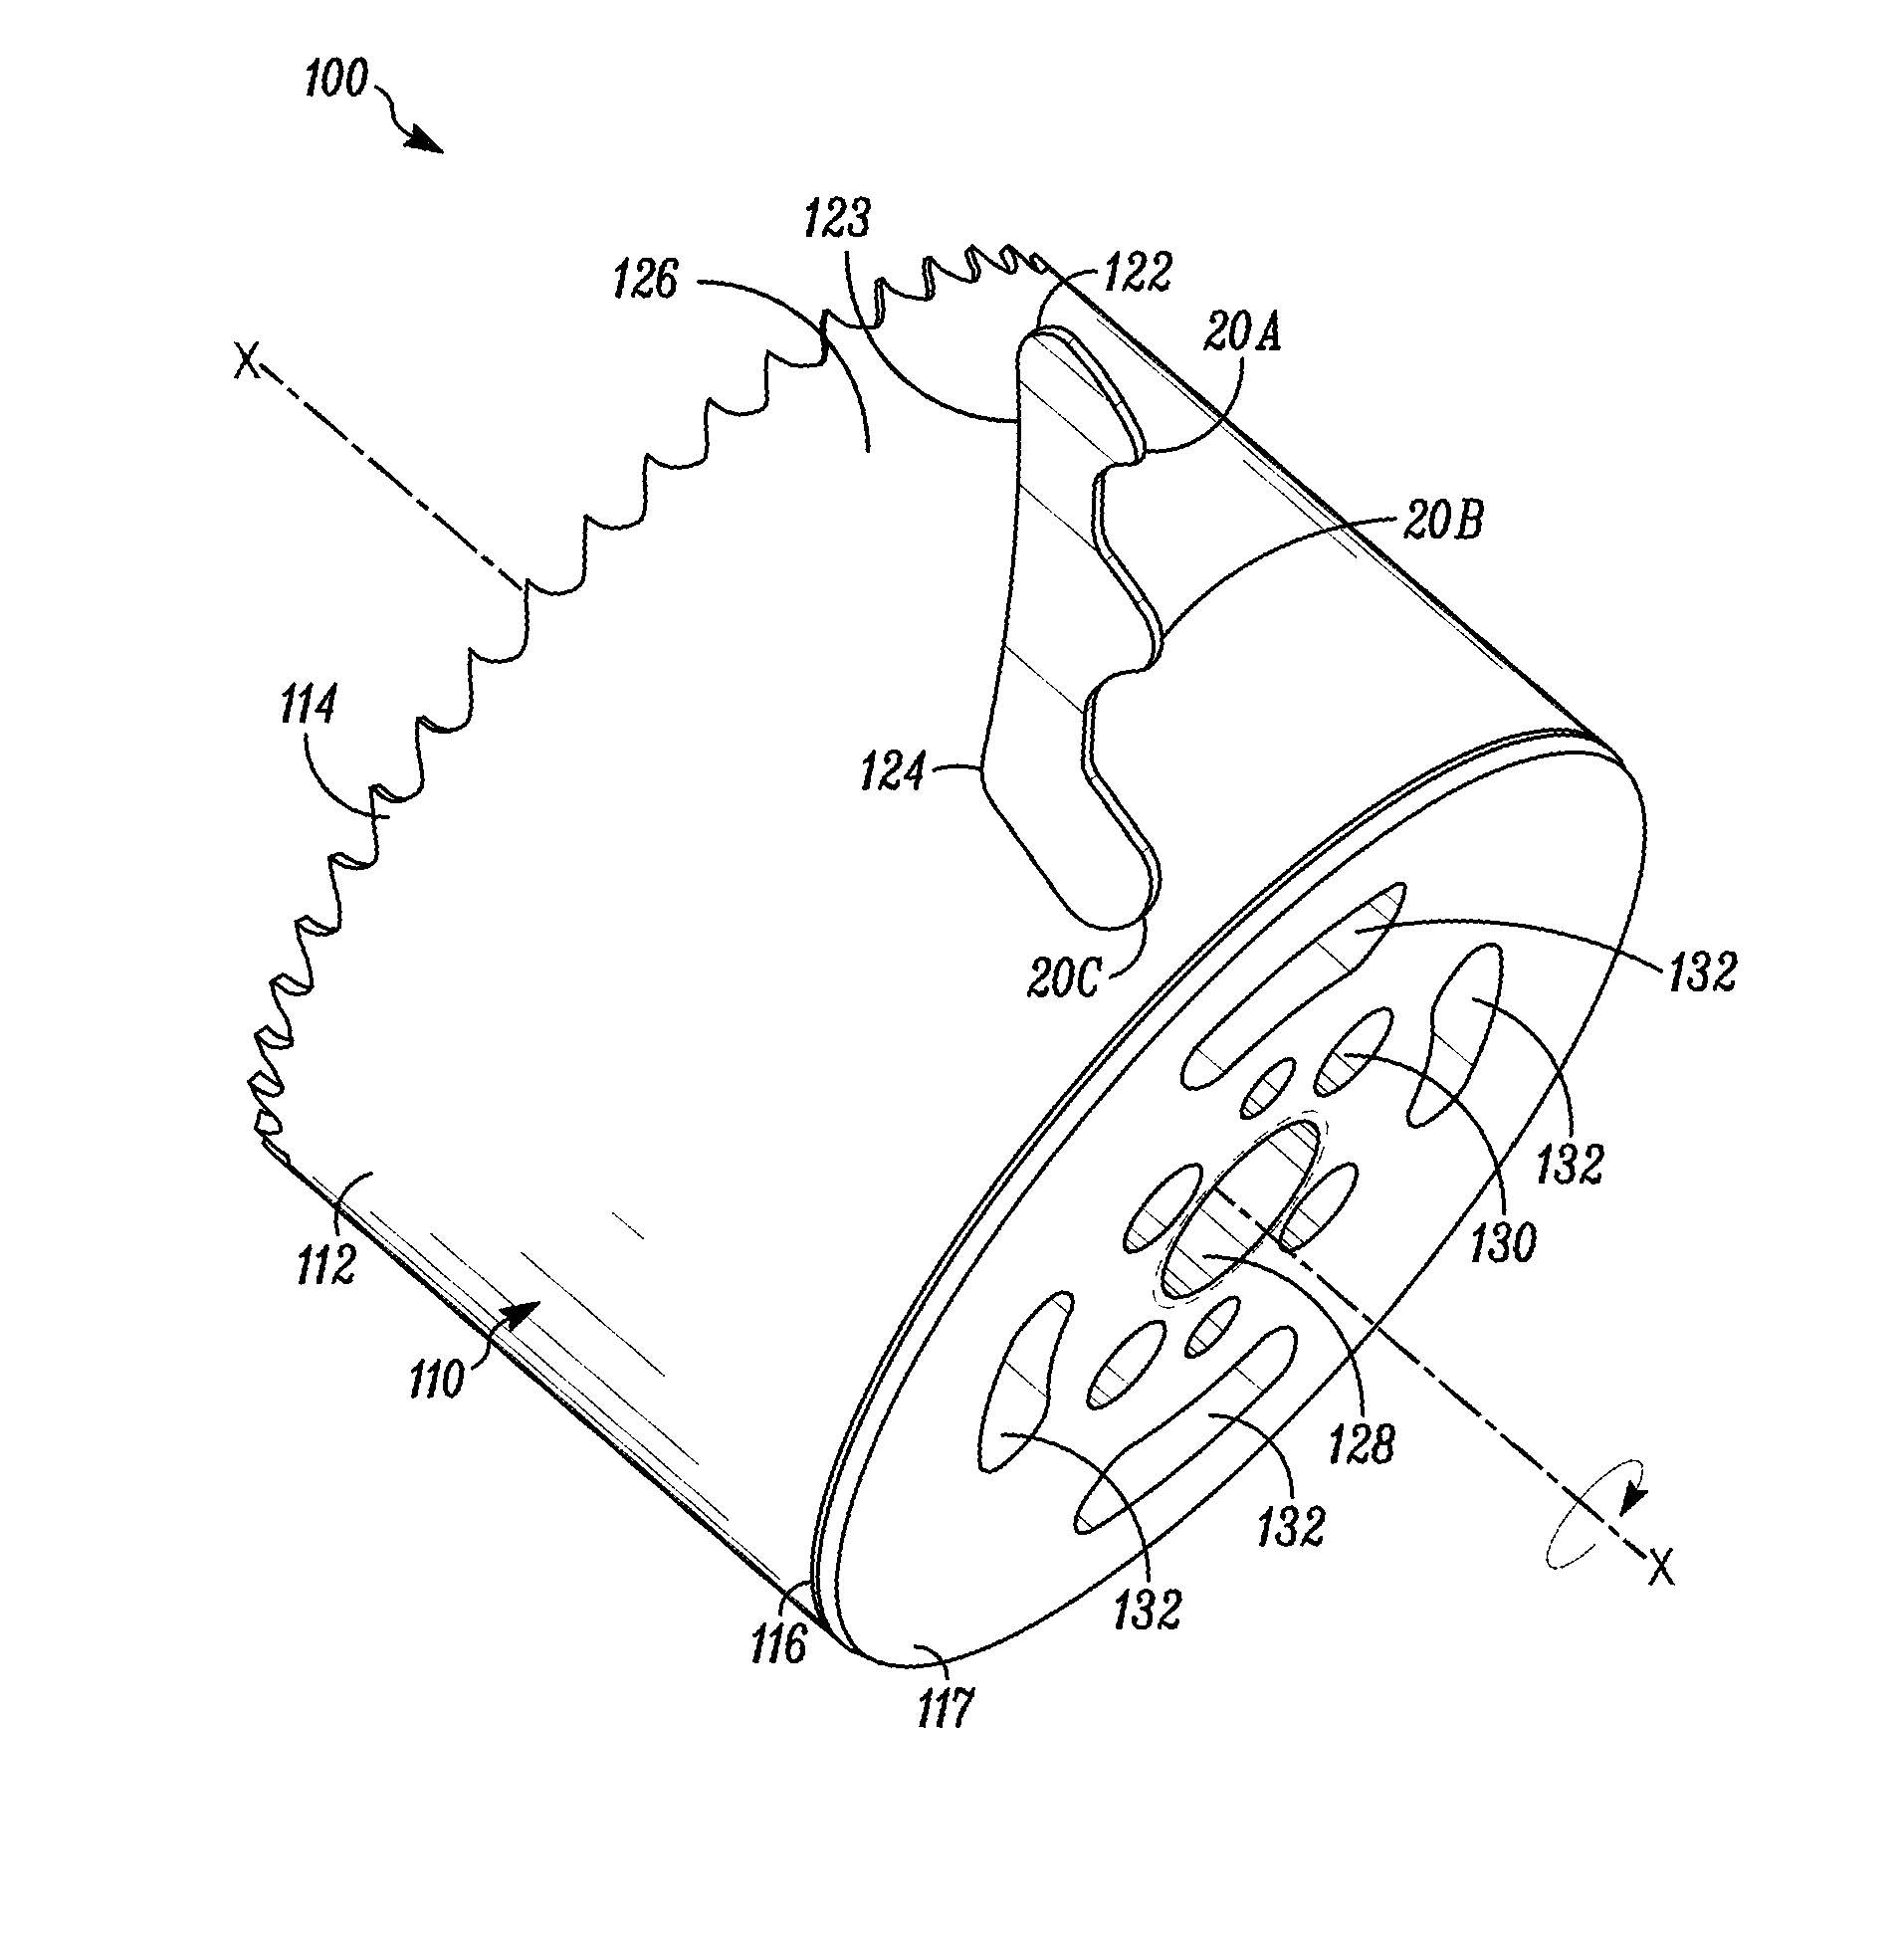 Hole cutter with axially-elongated aperture defining multiple fulcrums